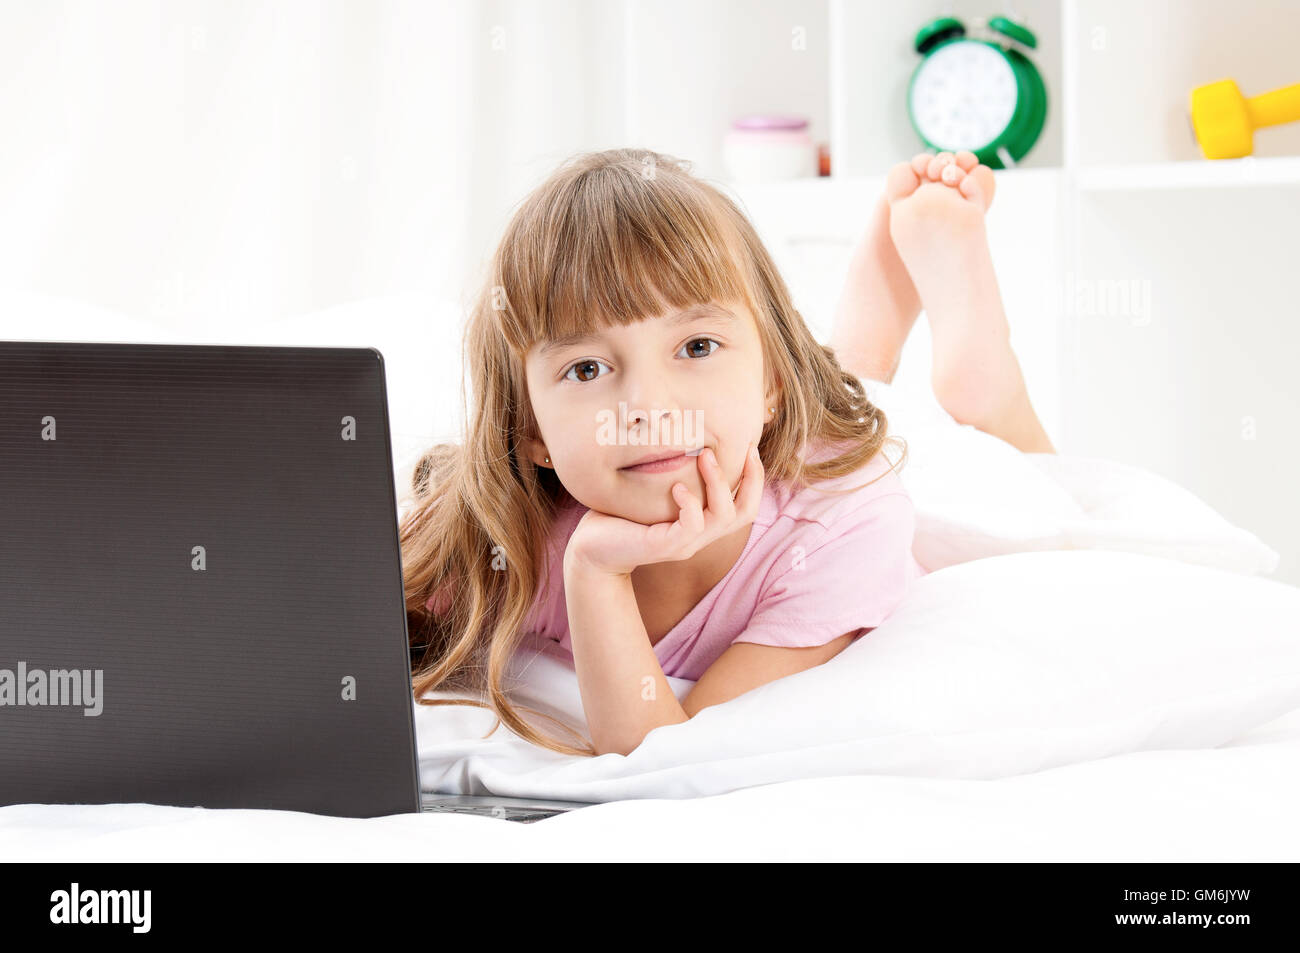 Girl with laptop on bed Stock Photo